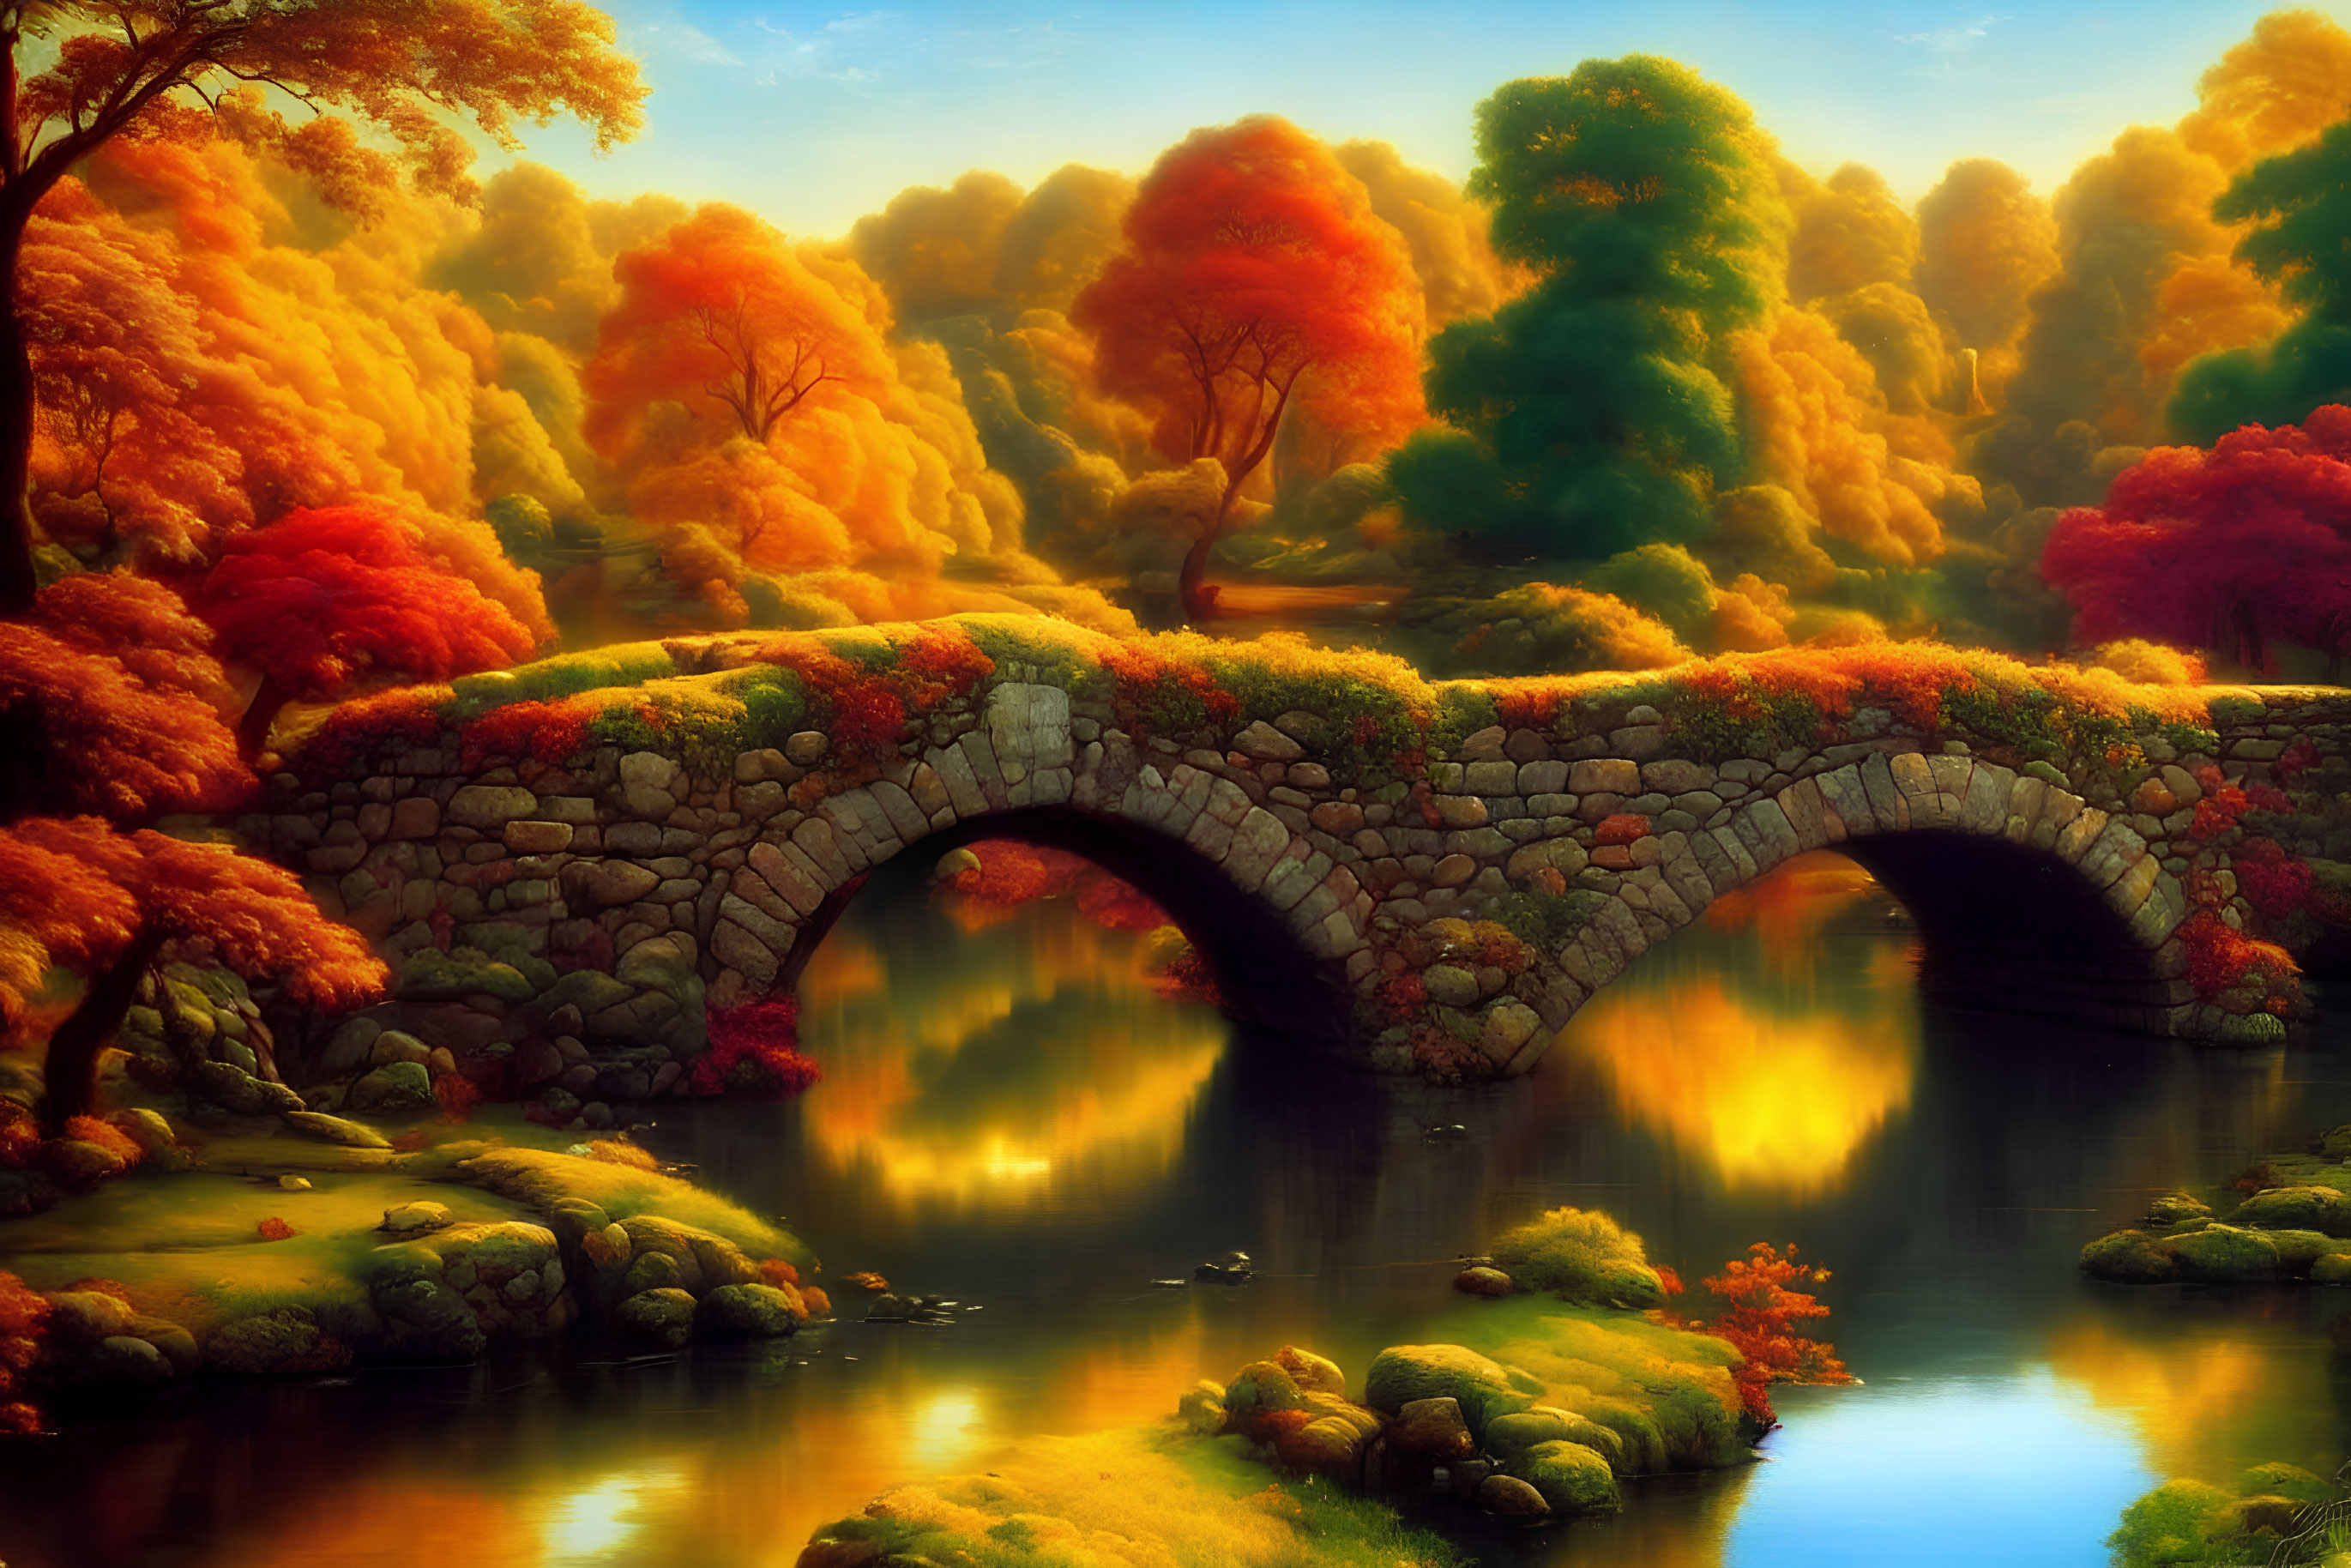 Tranquil autumn landscape with stone bridge and colorful foliage